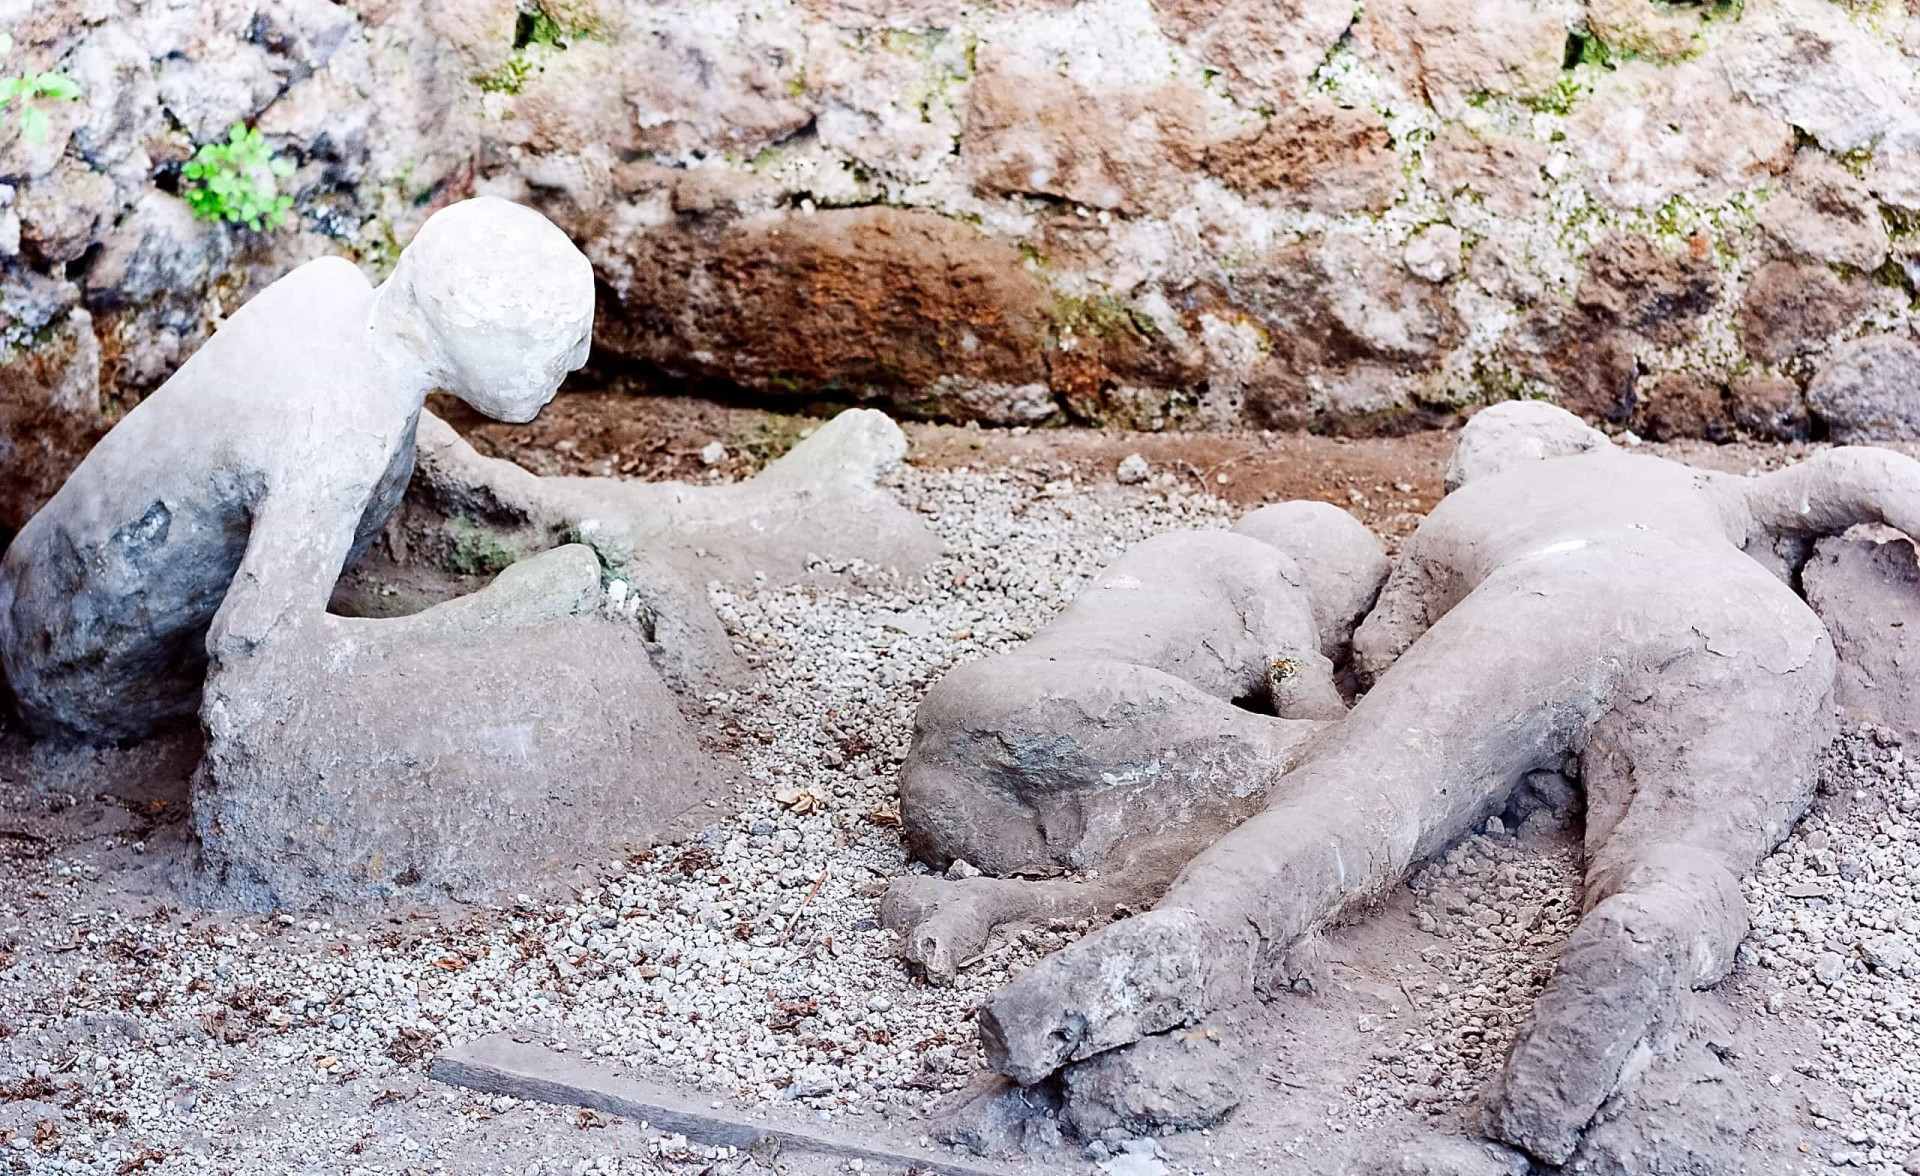 You can find bodies throughout the ancient city. It was originally believed that the cause of death of the Pompeii residents was being covered with volcanic ash.<p>You may also like:<a href="https://www.starsinsider.com/n/357956?utm_source=msn.com&utm_medium=display&utm_campaign=referral_description&utm_content=450429v6en-us"> Weird and wonderful animals you've never heard of</a></p>